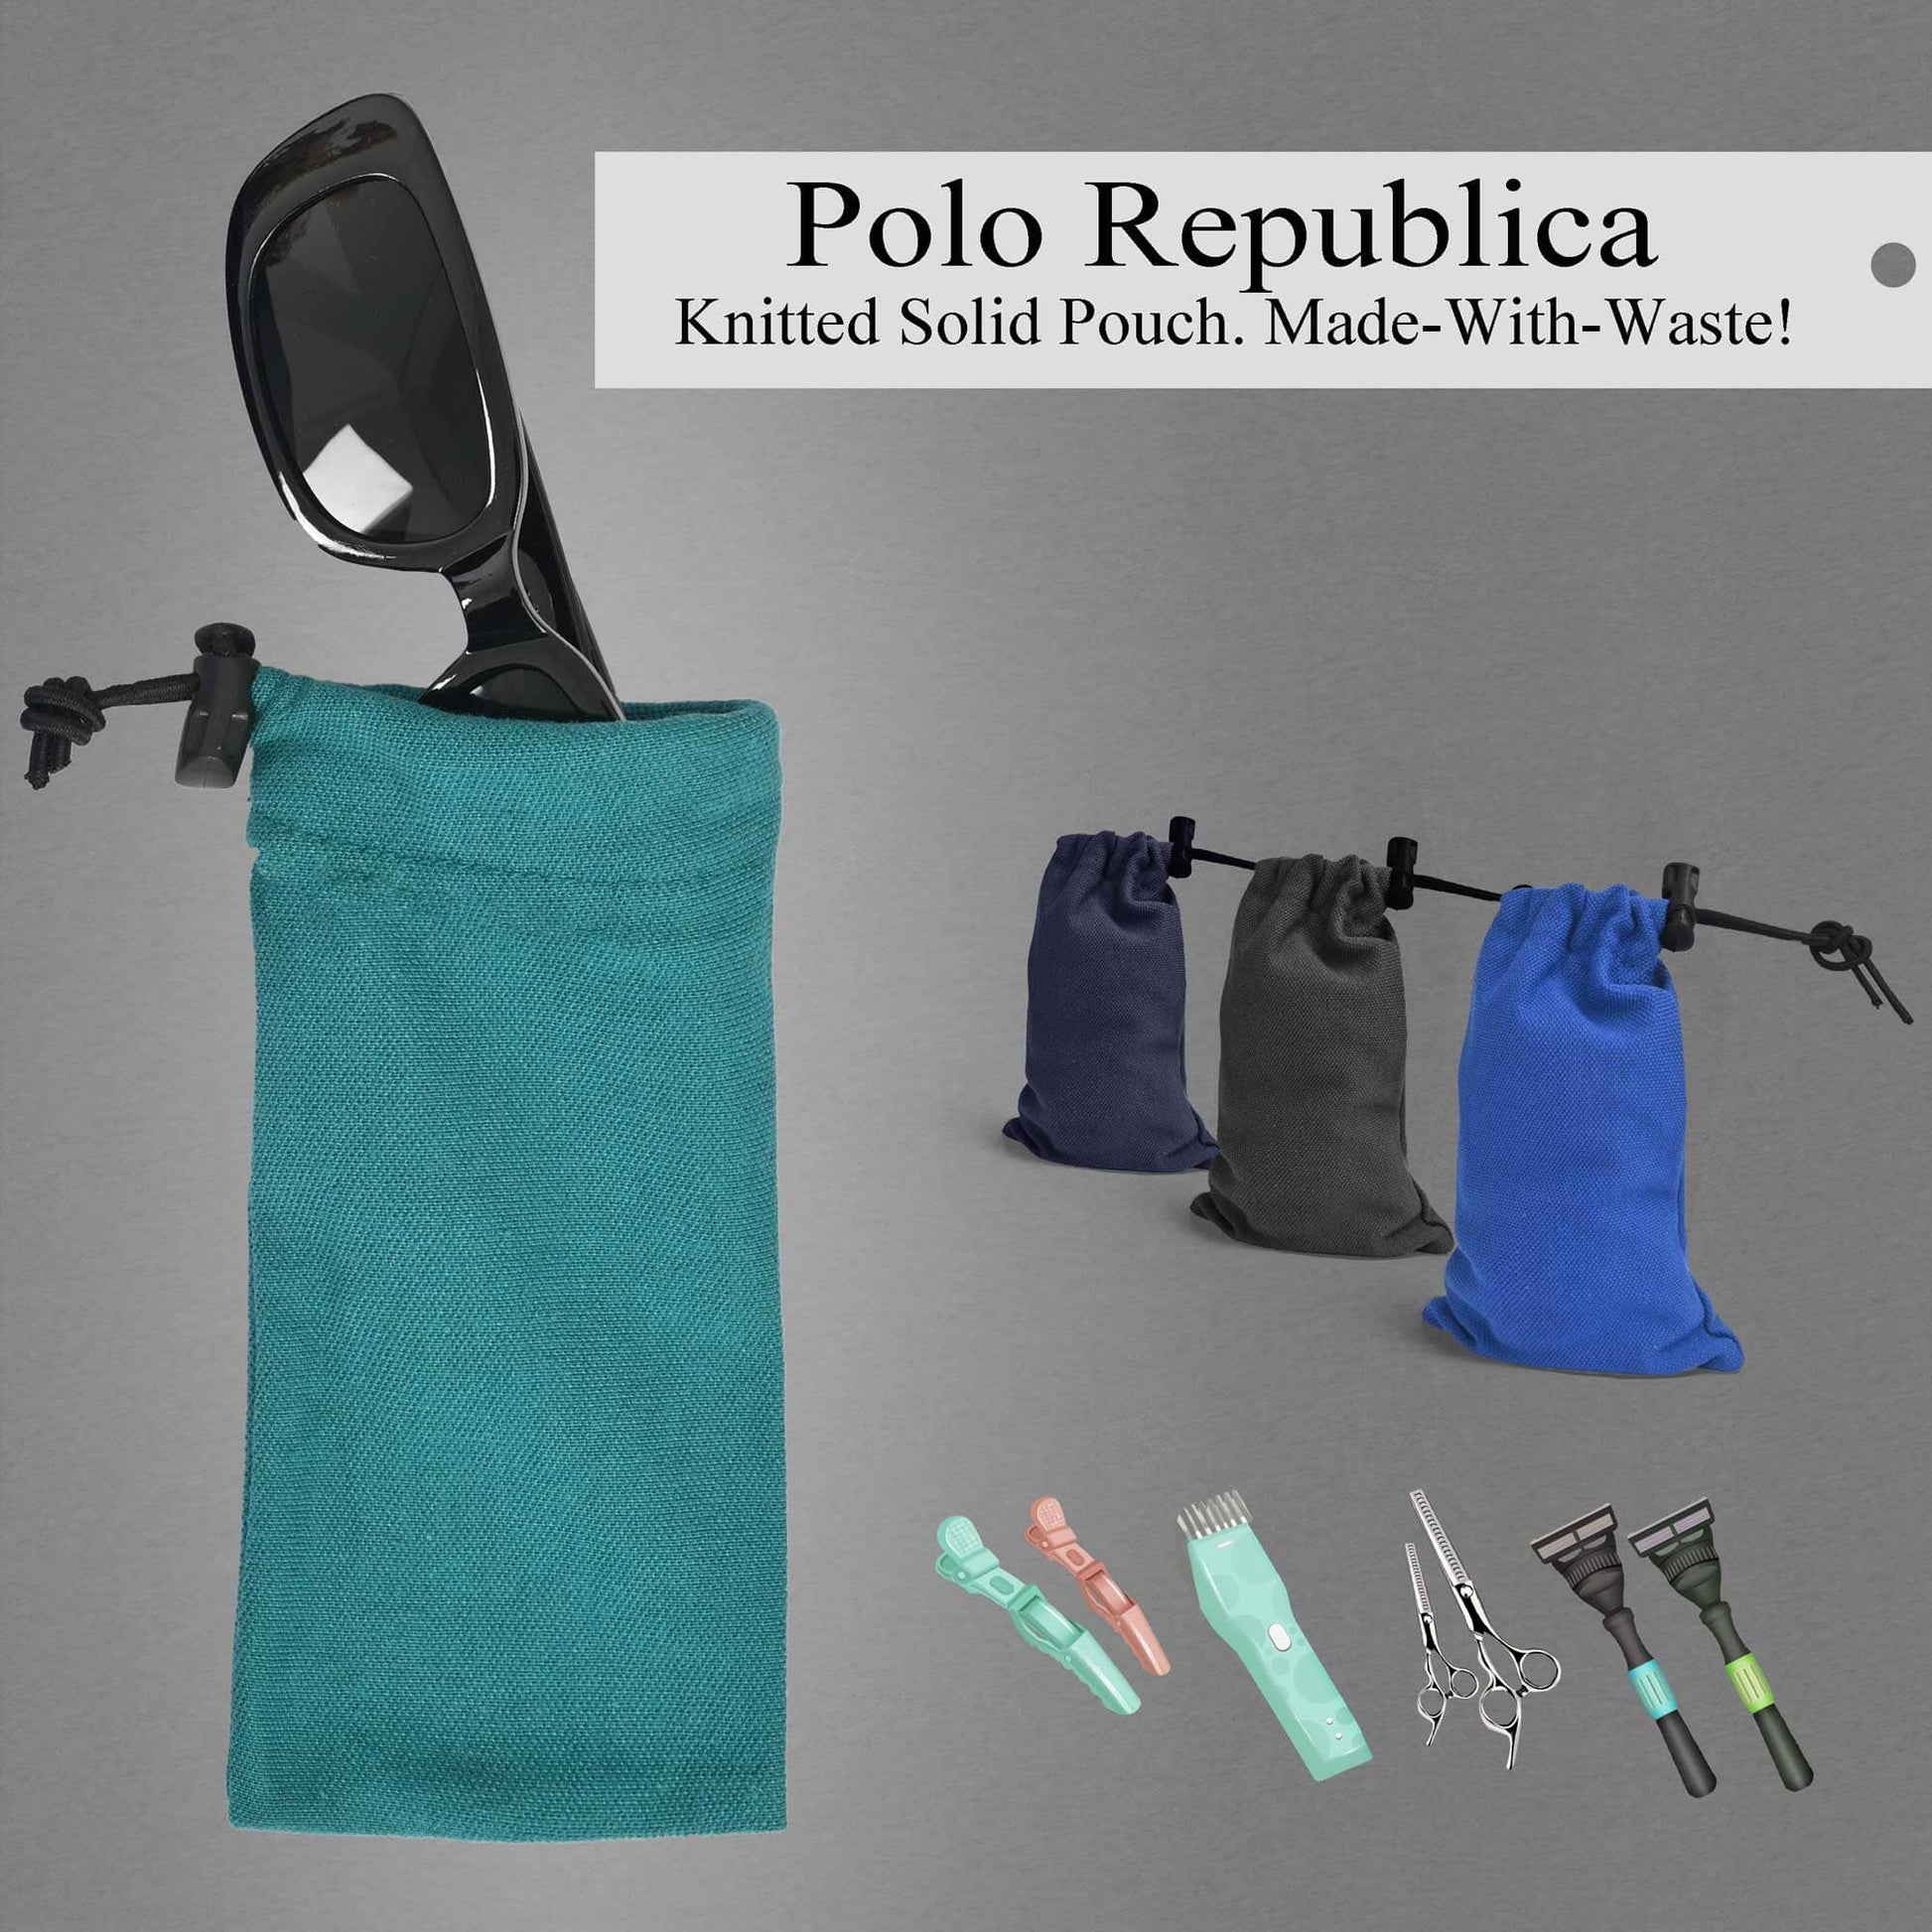 Polo Republica Knitted Pouch. Made-With-Waste! General Accessories Polo Republica 